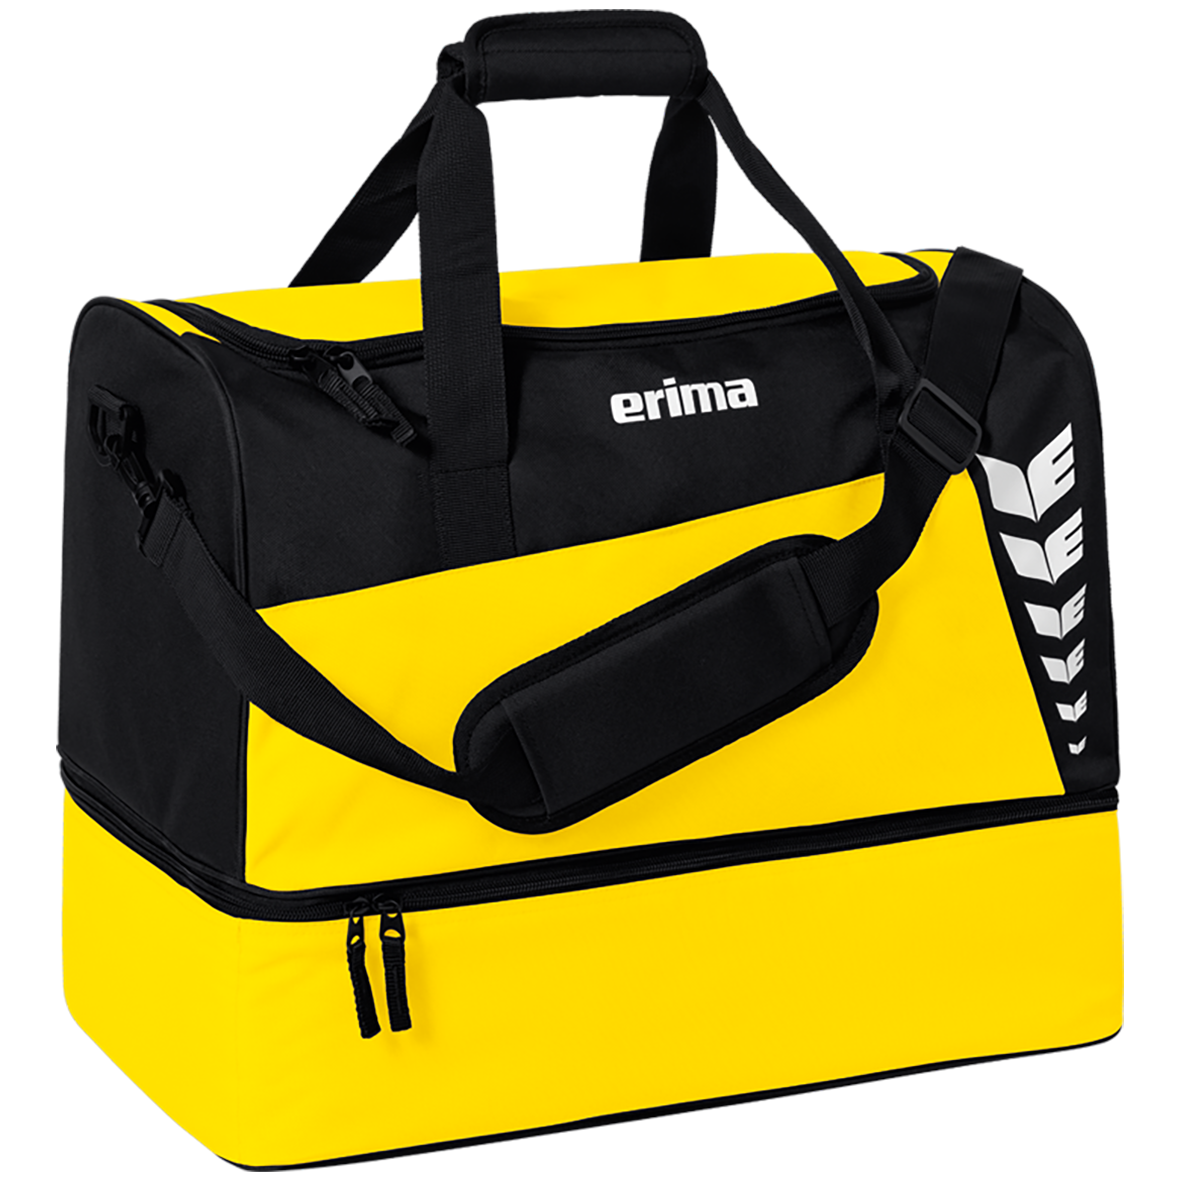 ERIMA SIX WINGS SPORTS BAG WITH BOTTOM COMPARTMENT, YELLOW-BLACK.